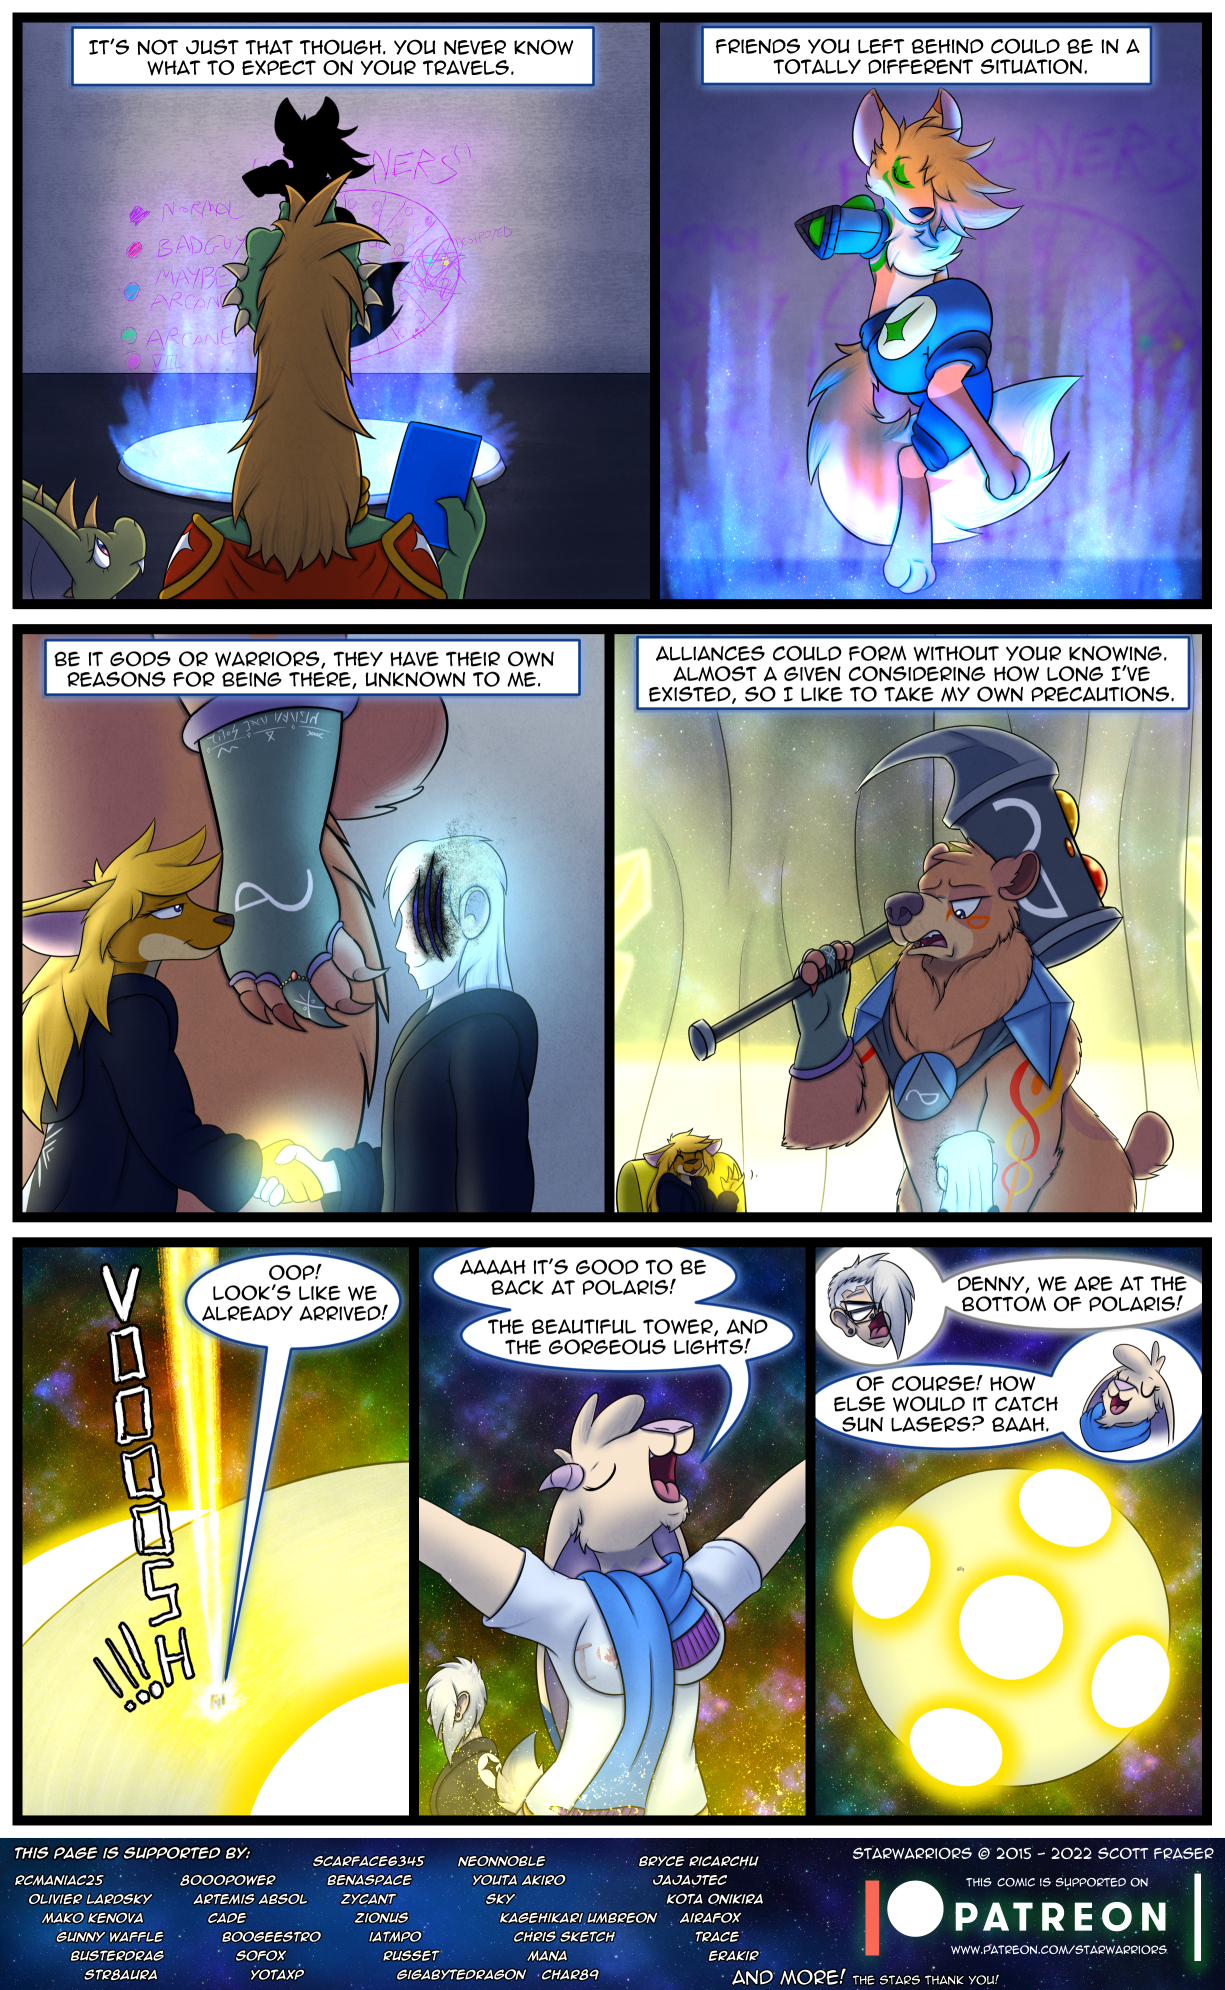 Ch6 Page 11 – Welcome Back